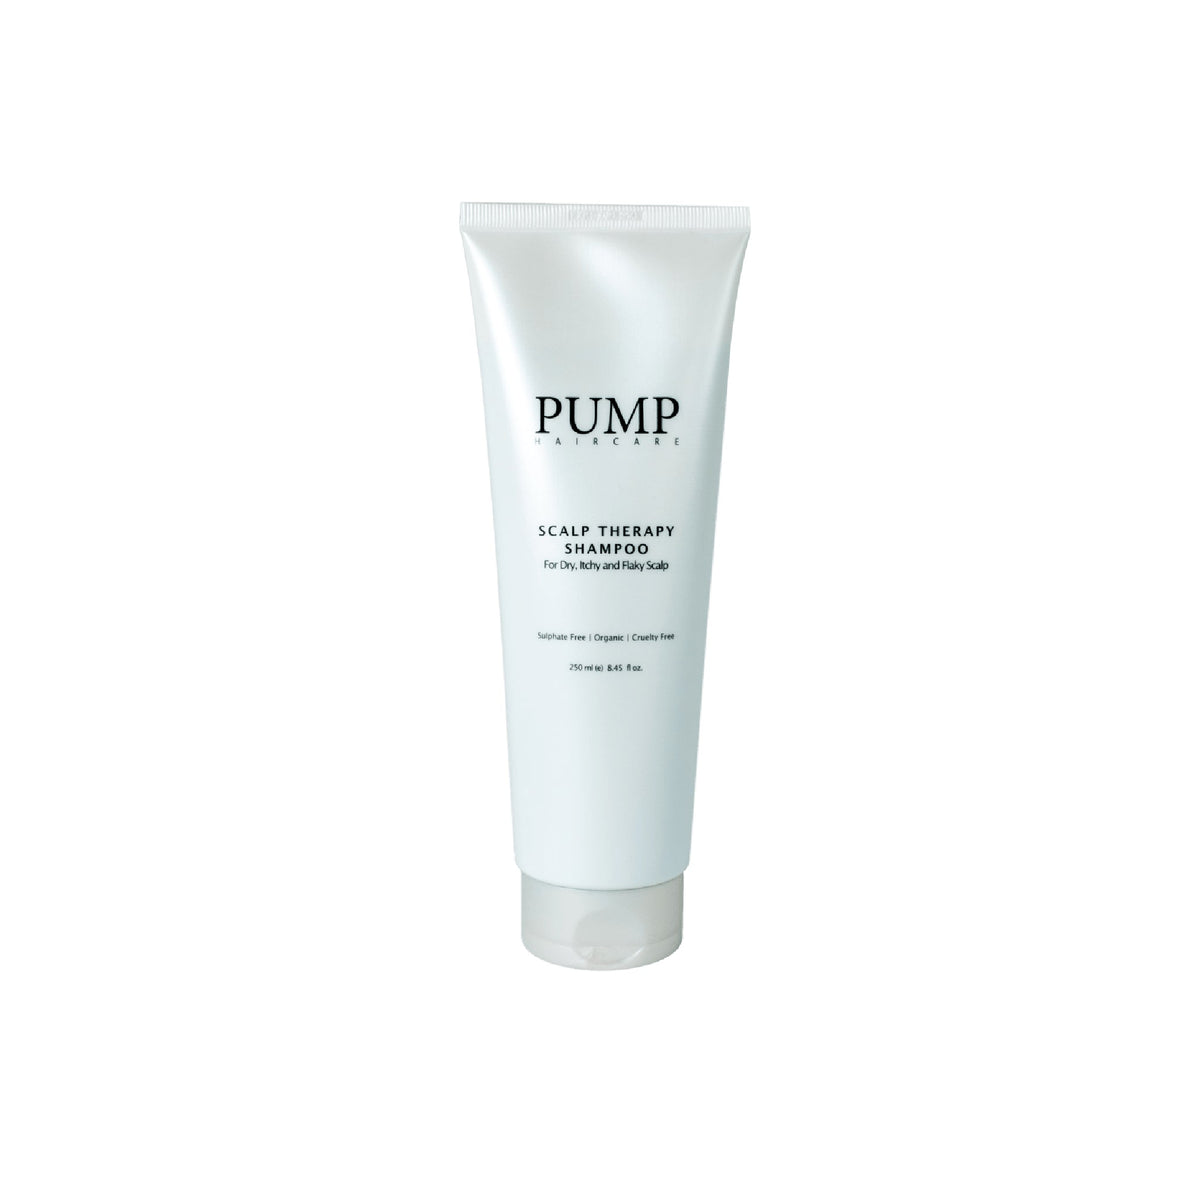 Pump Scalp Therapy Shampoo - Haircare Superstore